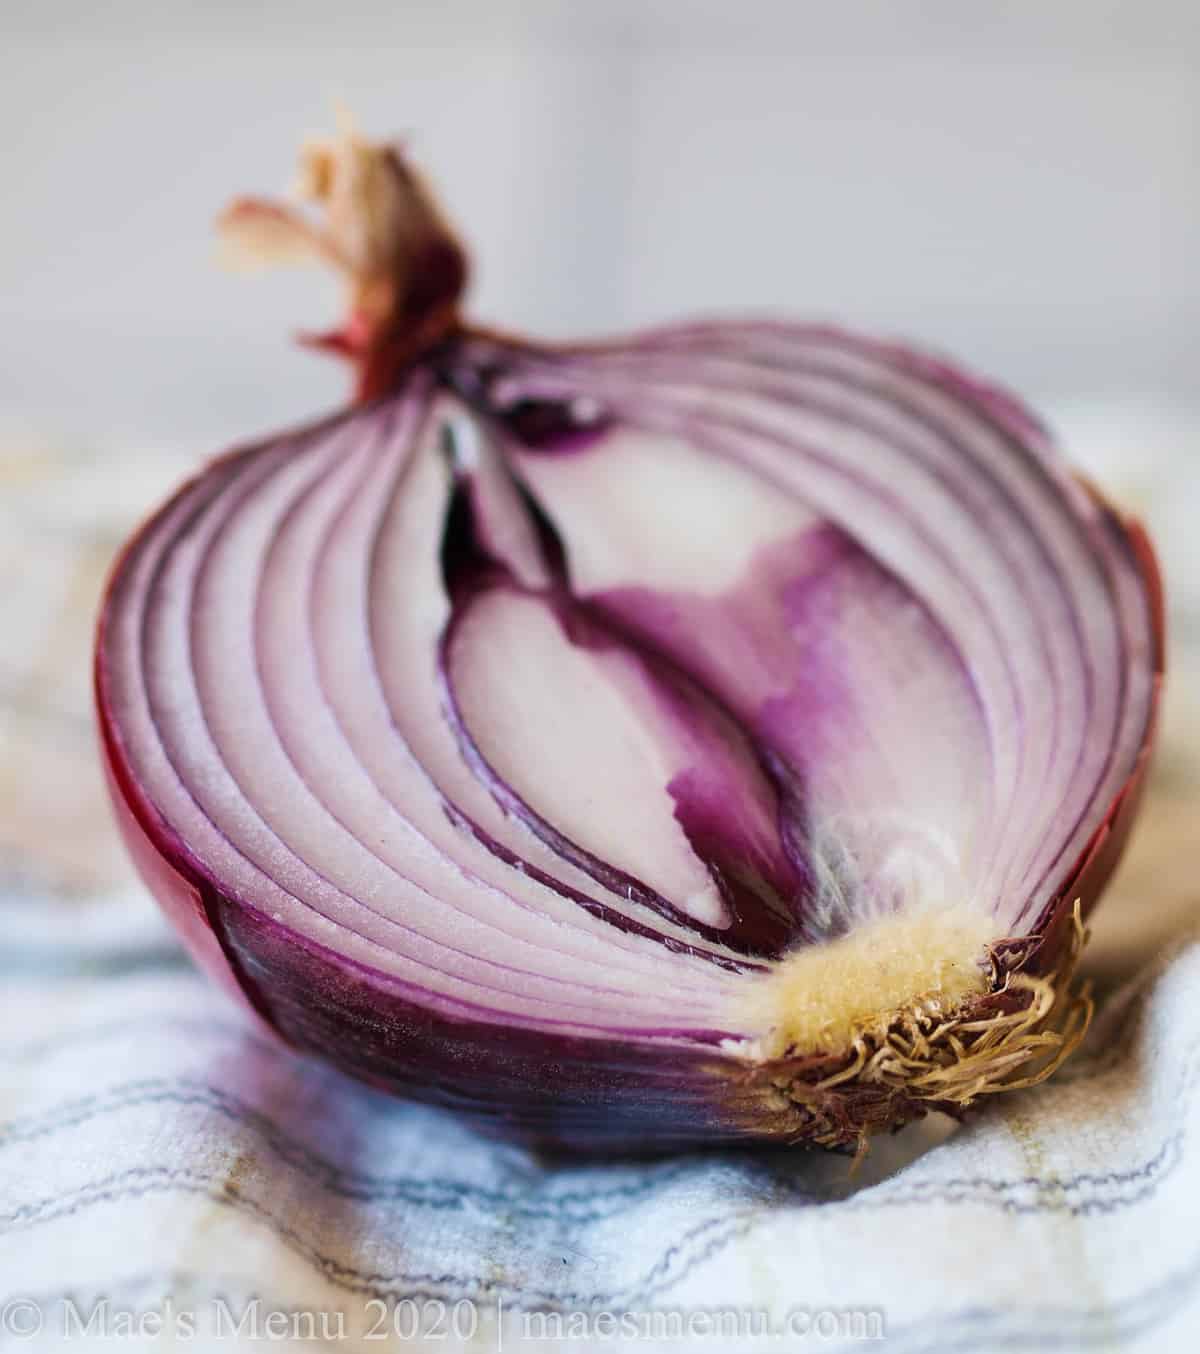 An up-close shot of a red onion cut in half.